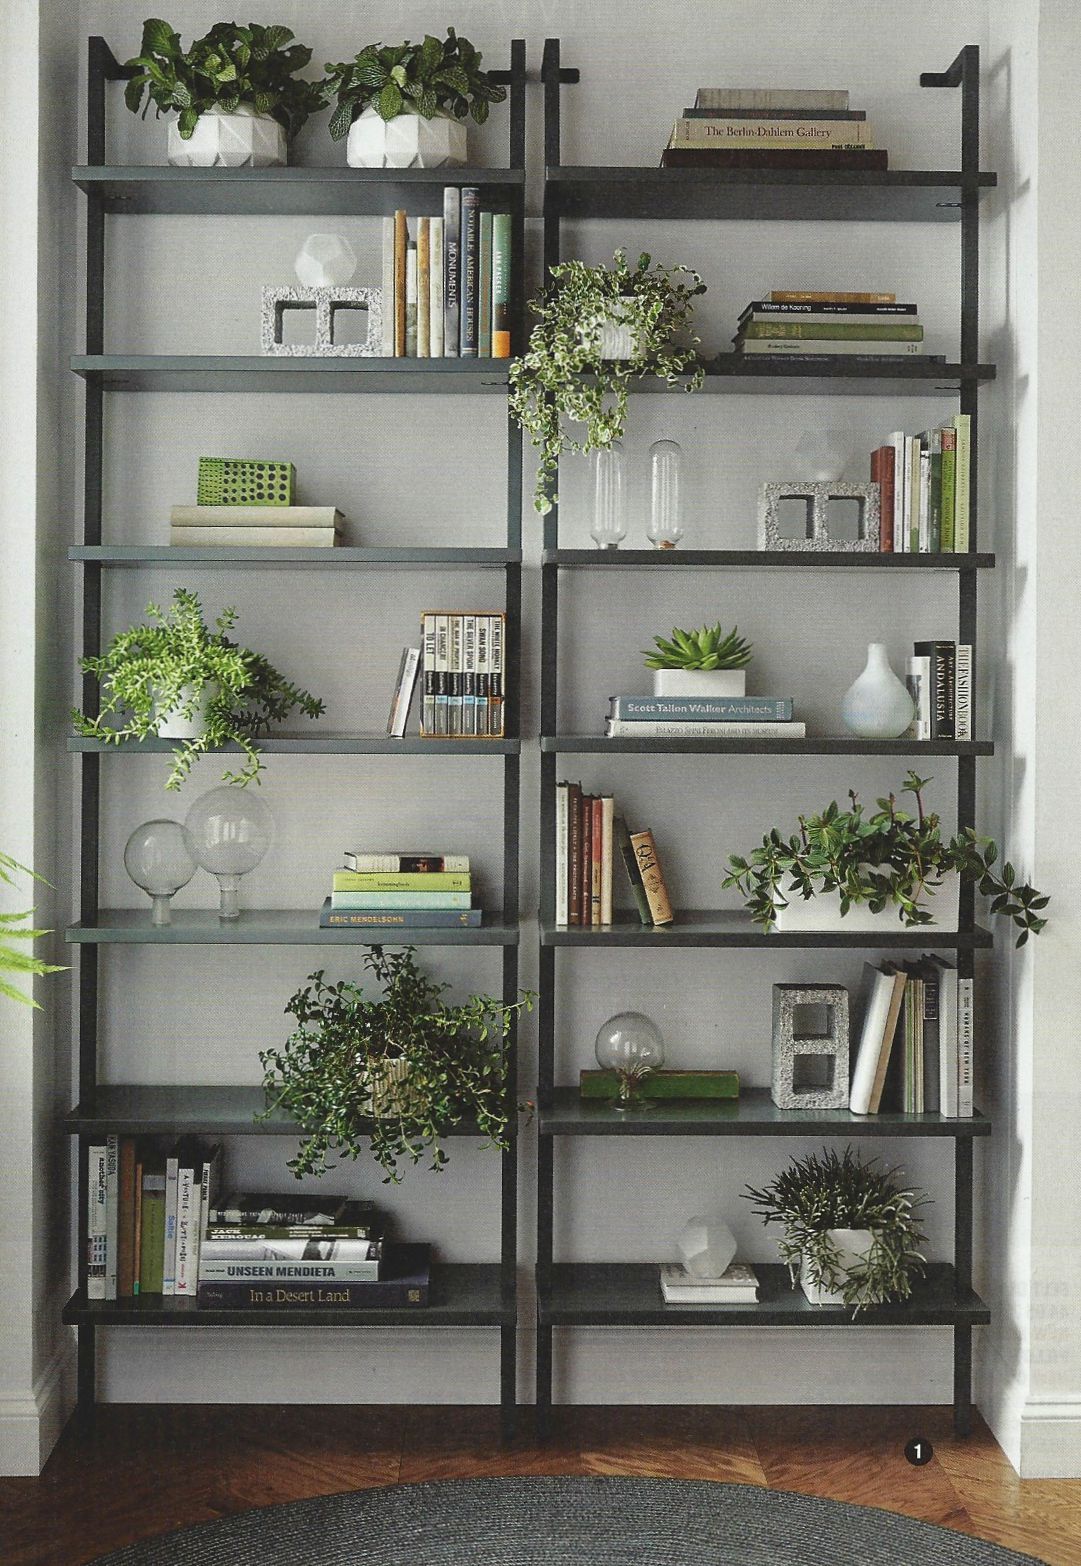 Bookshelf with Ornamental Plants as Natural Decoration